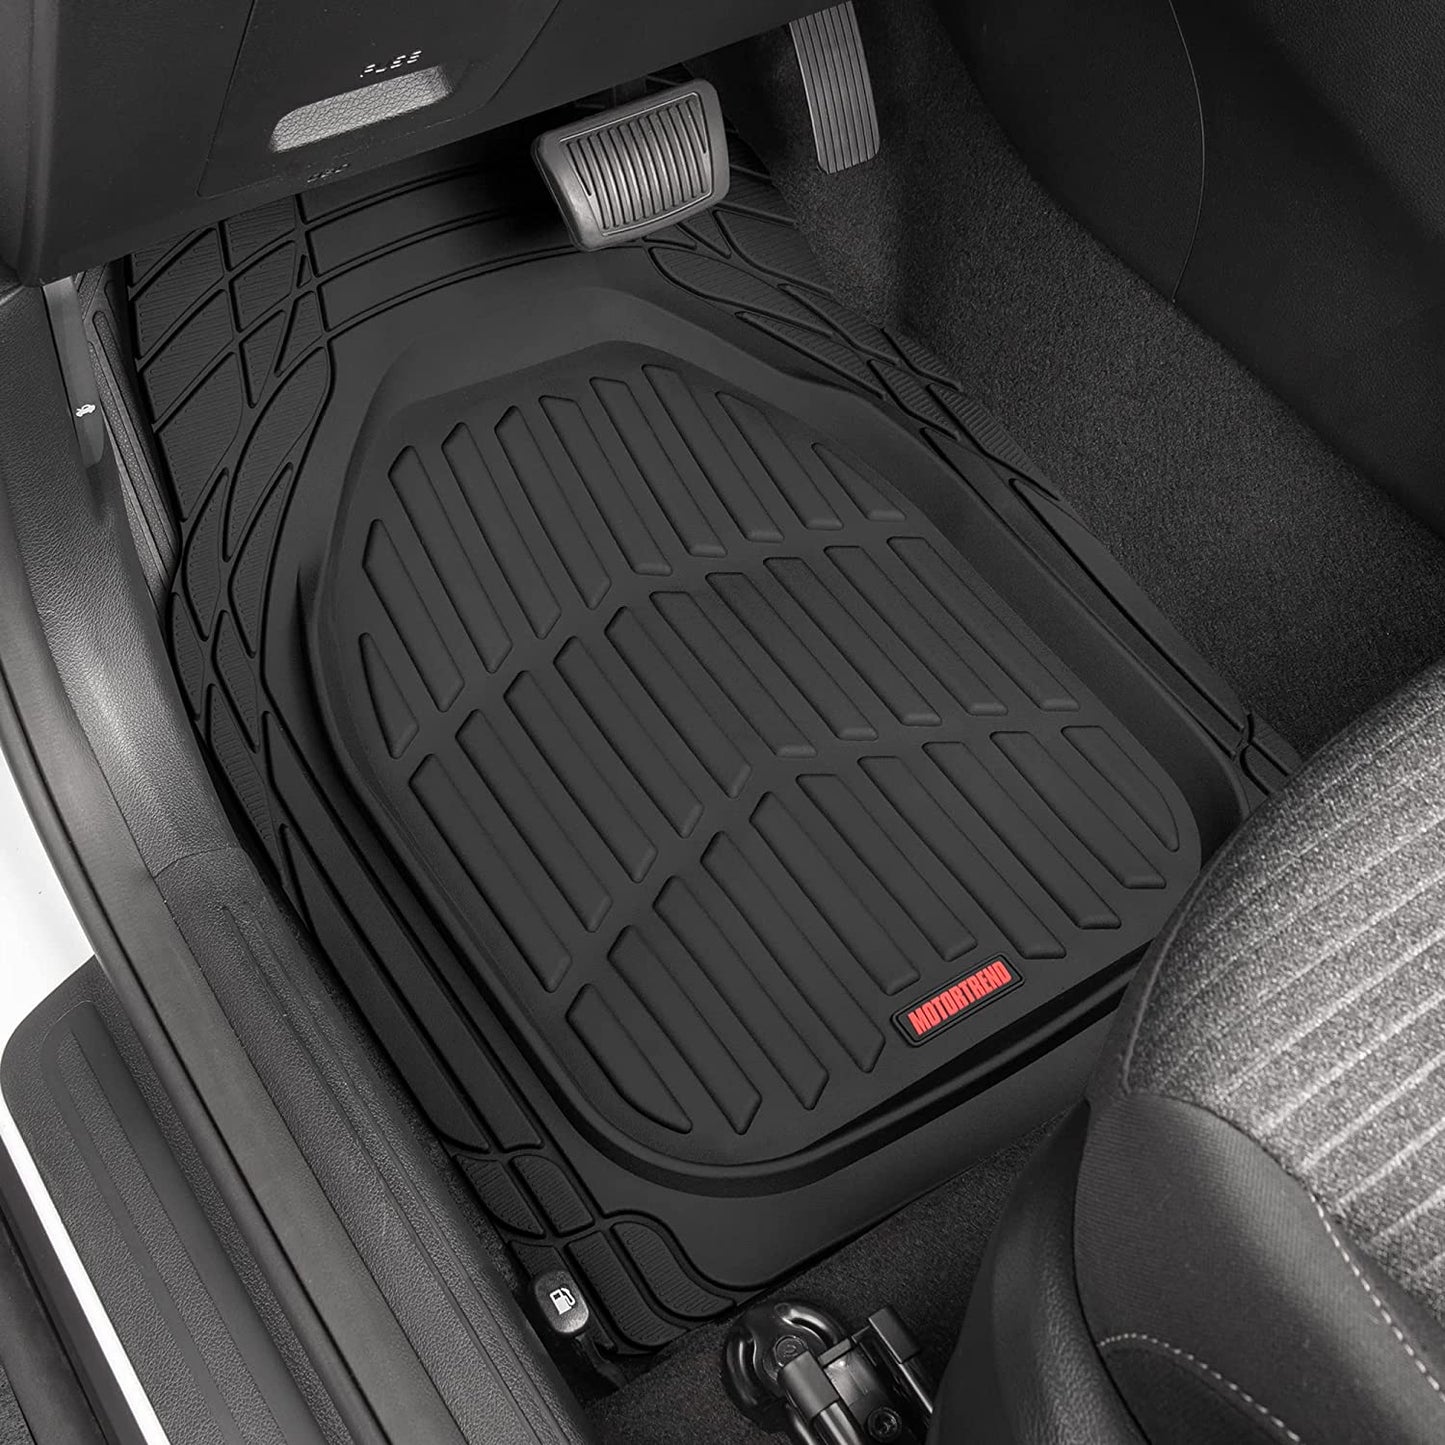 Universal Black All-Weather Car Floor Mats - Waterproof, Trim-To-Fit, Ideal for Cars, Trucks, and SUVs - Deep Dish Design, High-Quality Automotive Floor Liners